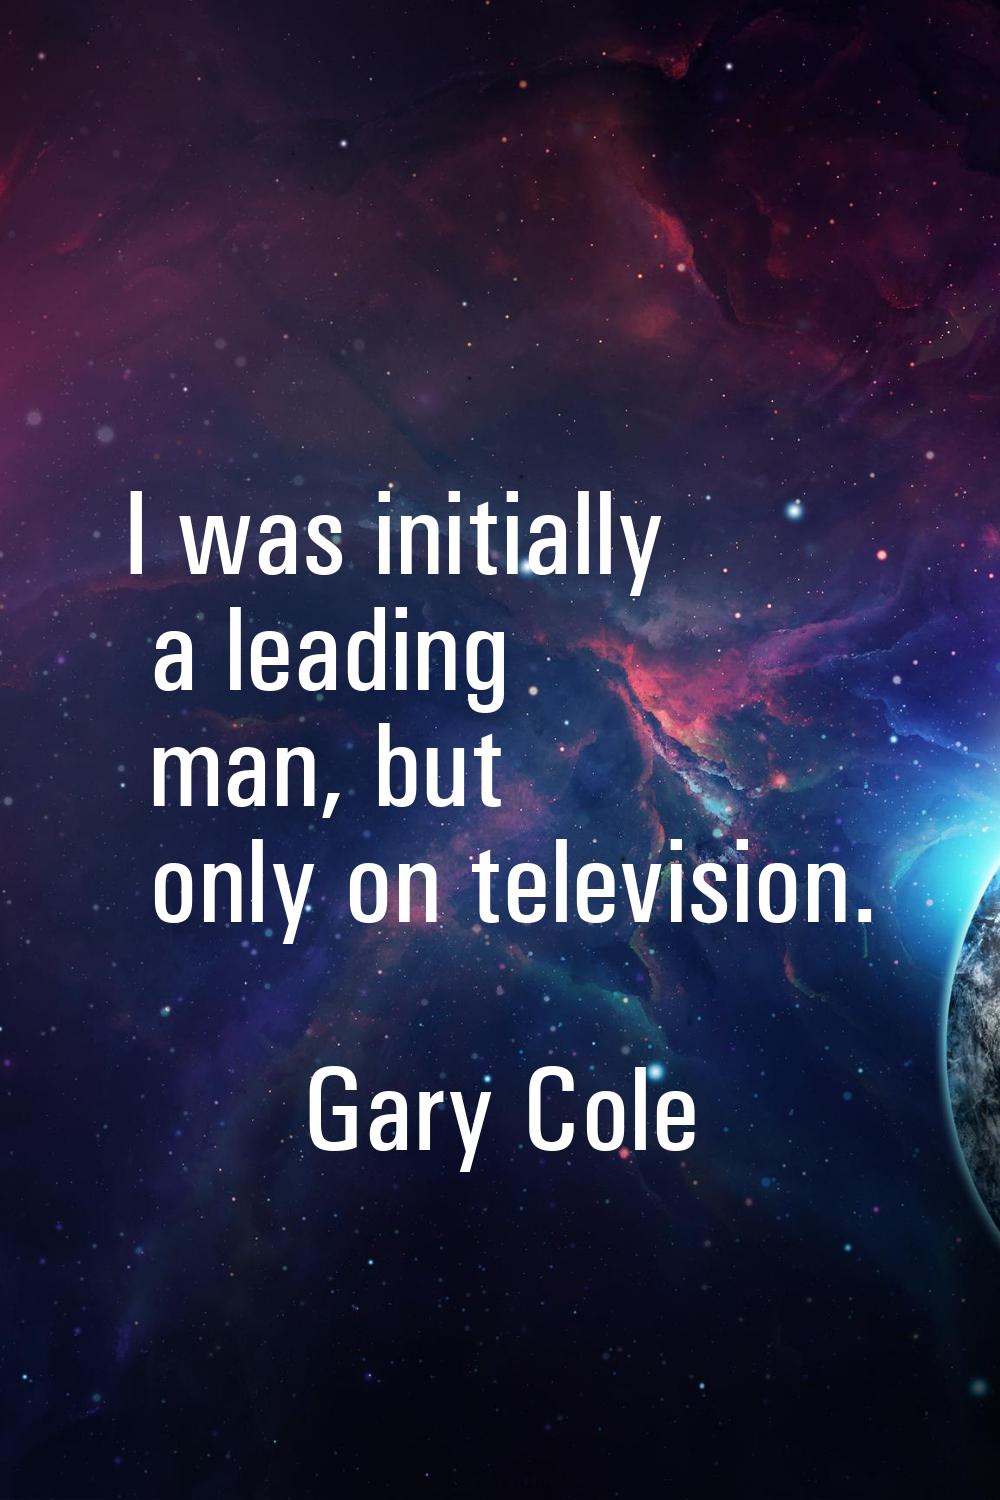 I was initially a leading man, but only on television.